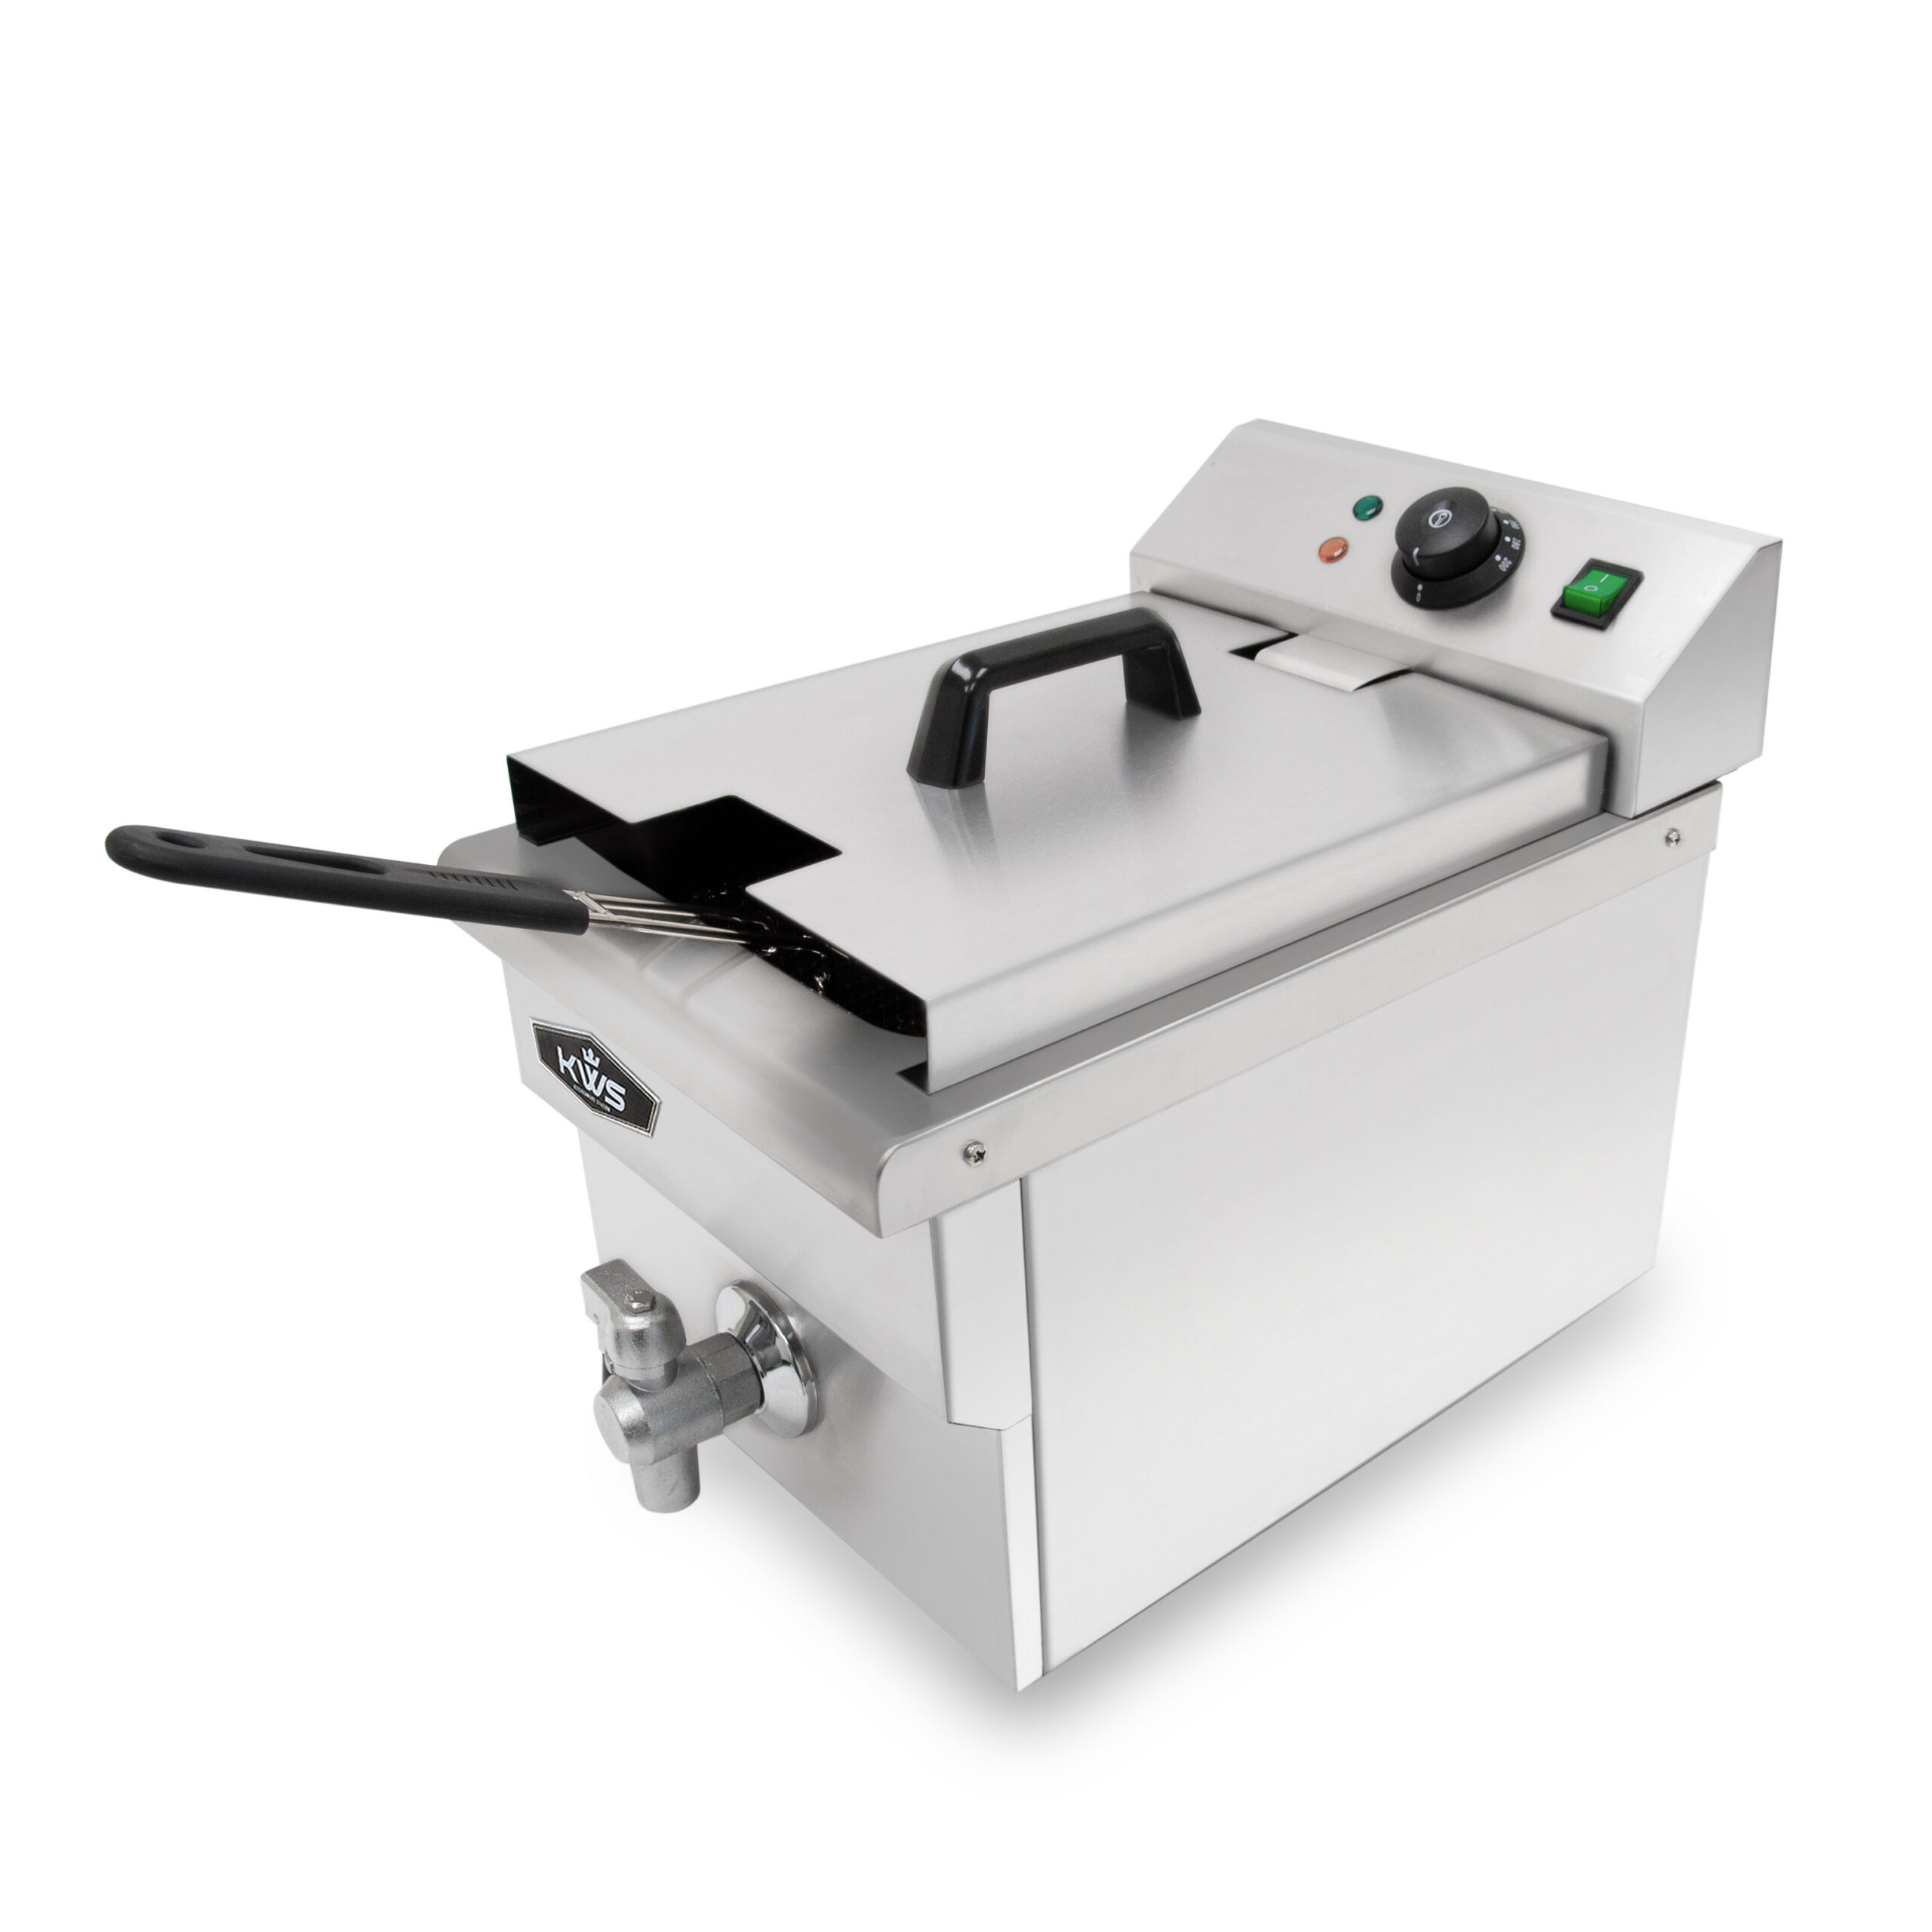 Details about   KWS DY-6 Commercial 1750W Electric Deep Fryer with Faucet Drain Valve System 